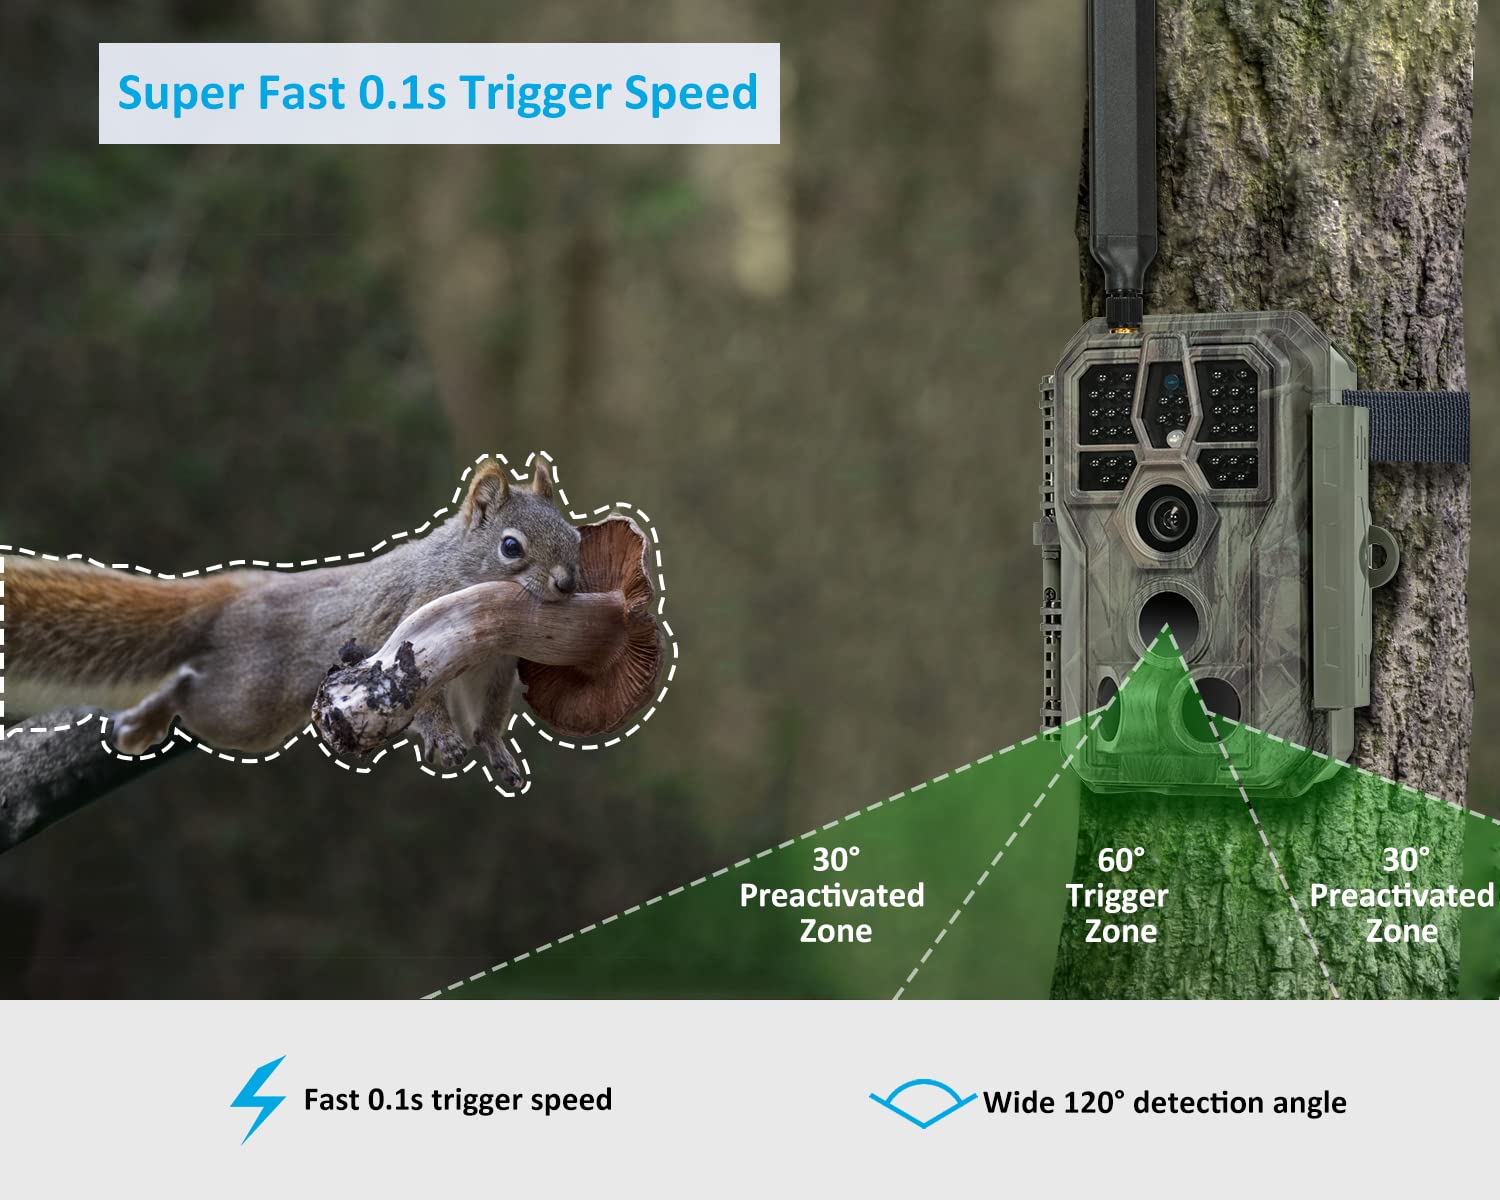 GardePro X50 Celluar Trail Camera, 3G/4G LTE Game Cameras with 32MP 1080p, Innovative Lite Video, 0.1s Trigger Speed, 100ft Night Vision, Send Pictures to Cell Phone